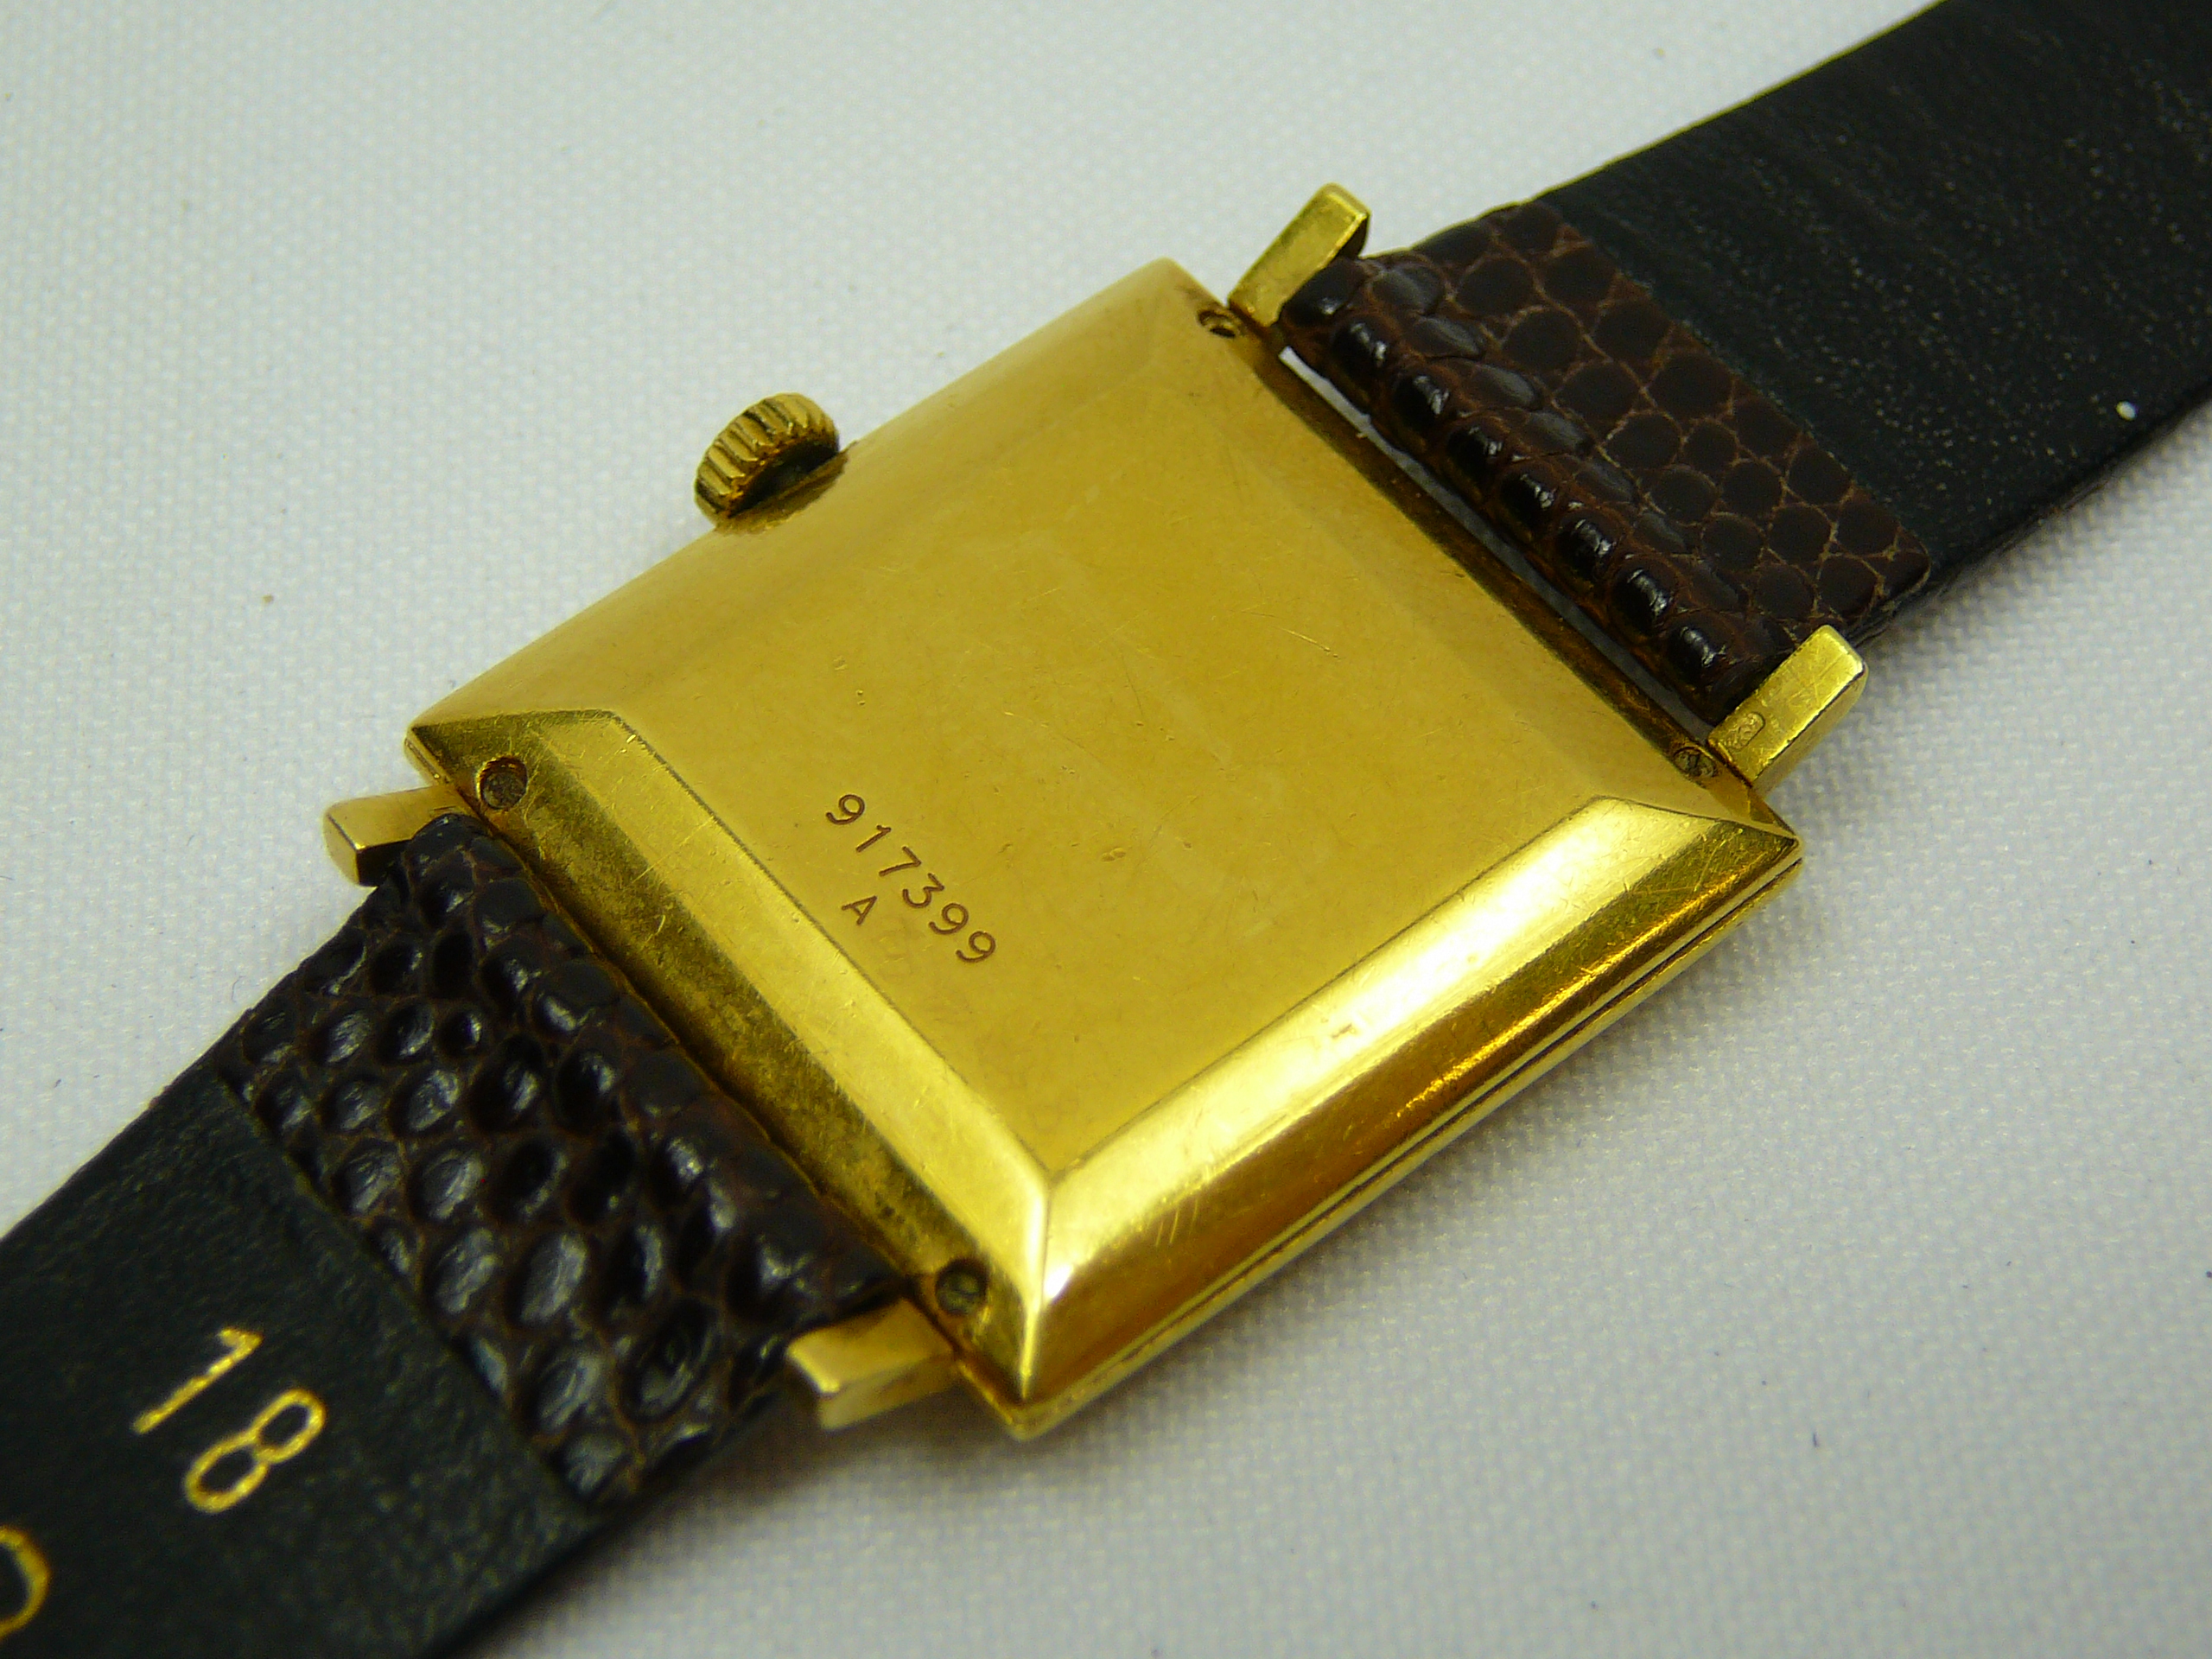 Gents Vintage Gold Jaeger LeCoultre Wrist Watch - Image 3 of 3